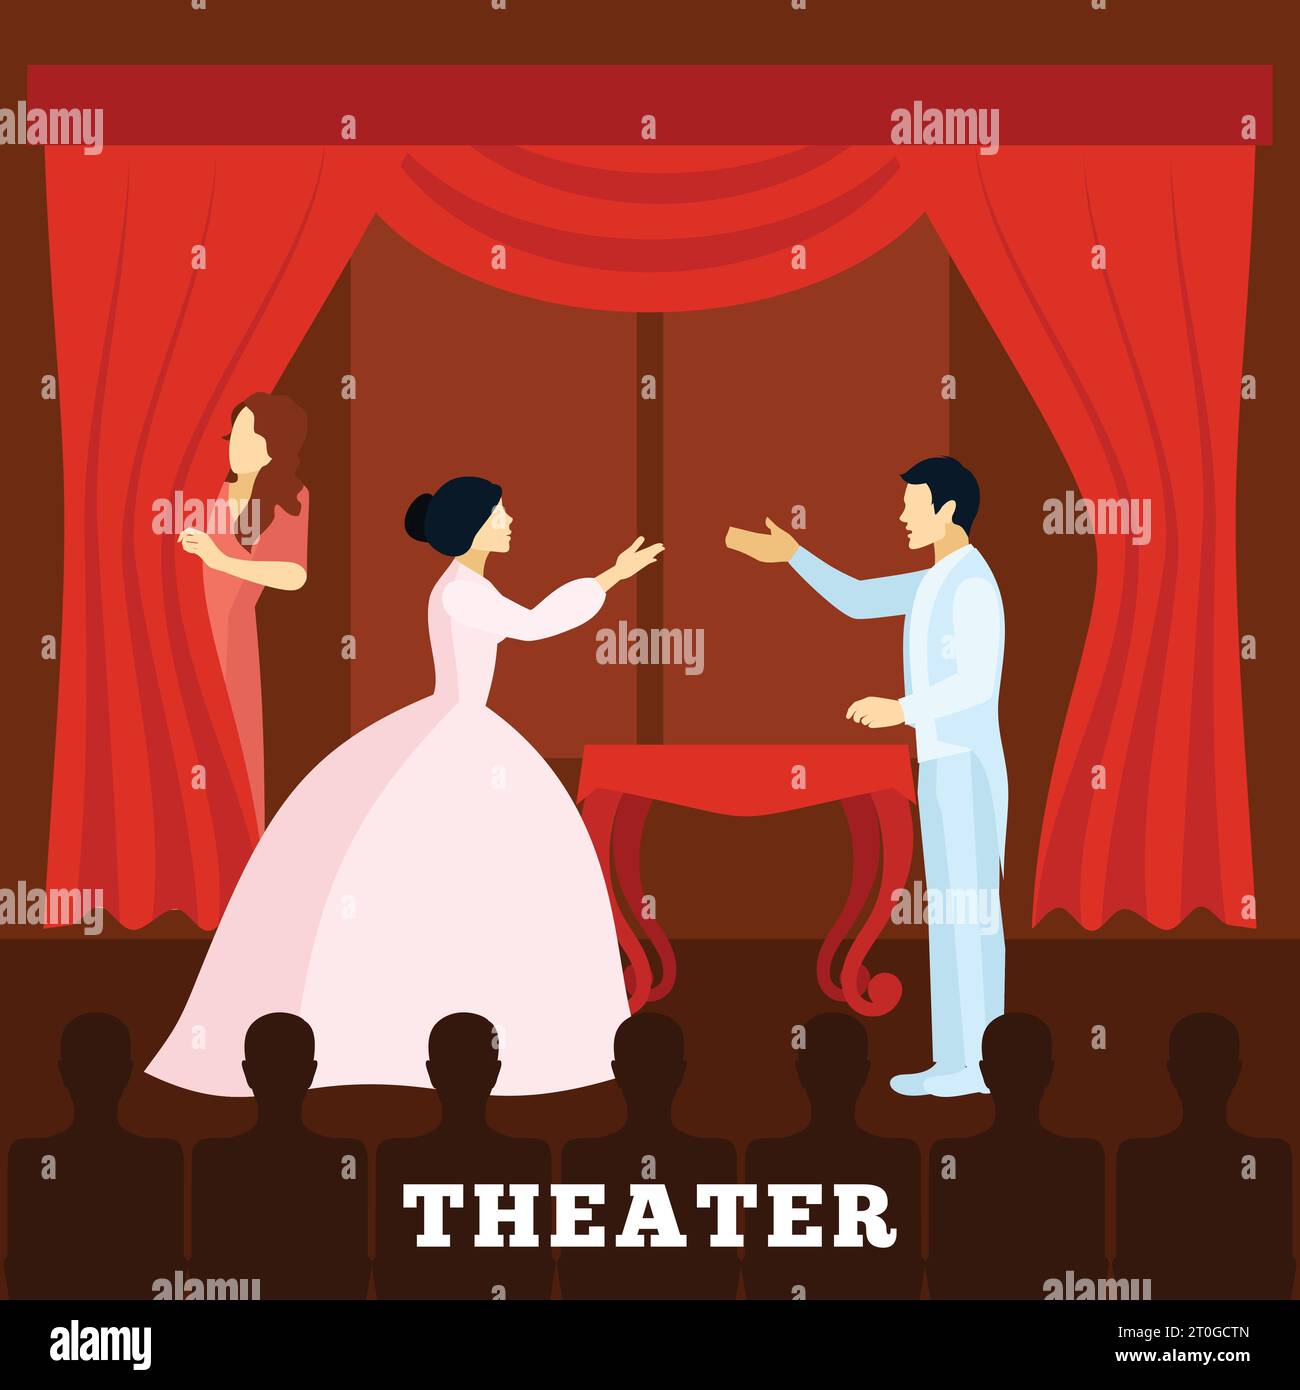 Theatre stage performance with actors curtain and audience poster flat ...